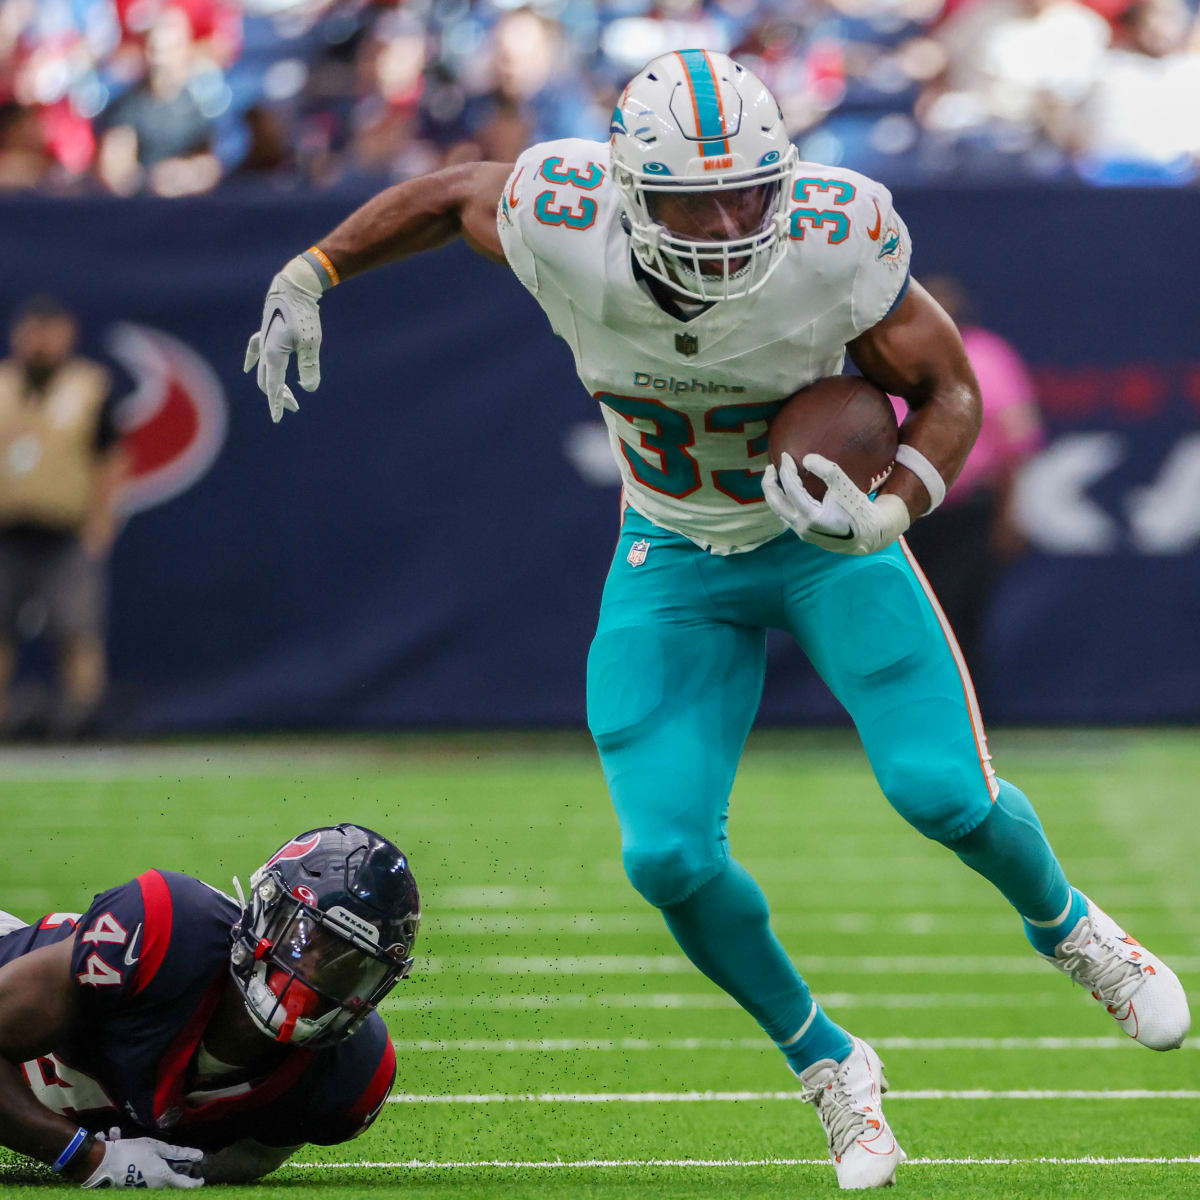 Dolphins vs. Jaguars preseason game: How to watch on TV, streaming